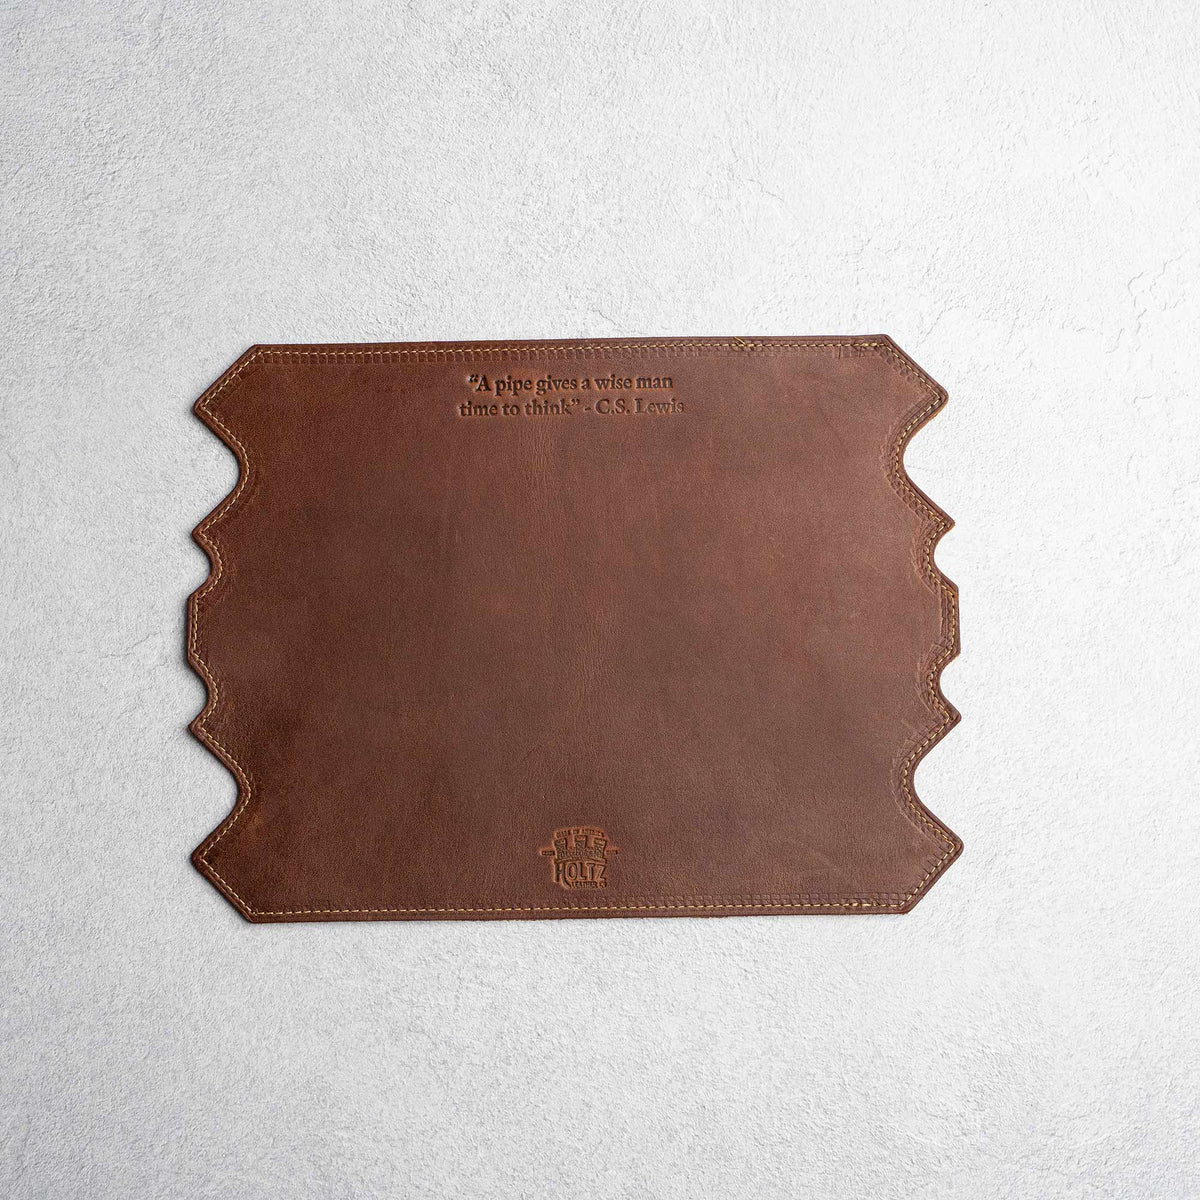 Fine leather pipe smoking mat with personalization